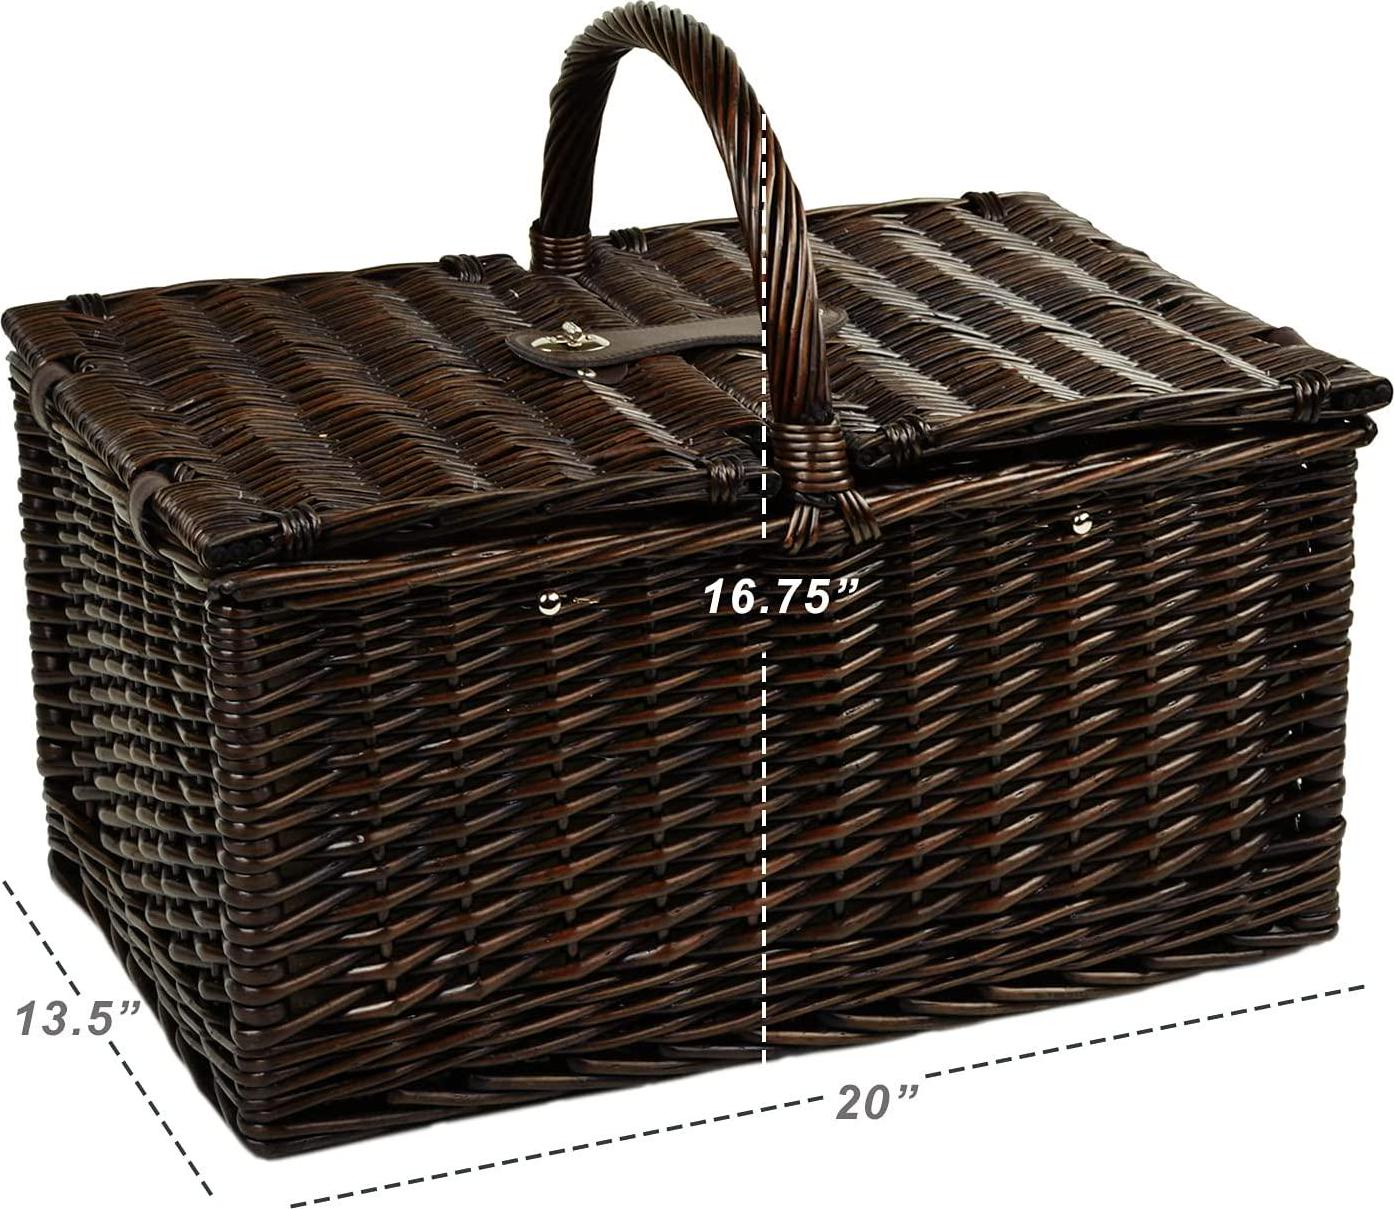 Picnic at Ascot Buckingham Willow Picnic Basket with Service for 4 with Blanket and Coffee Service- Designed, Assembled and Quality Approved in the USA